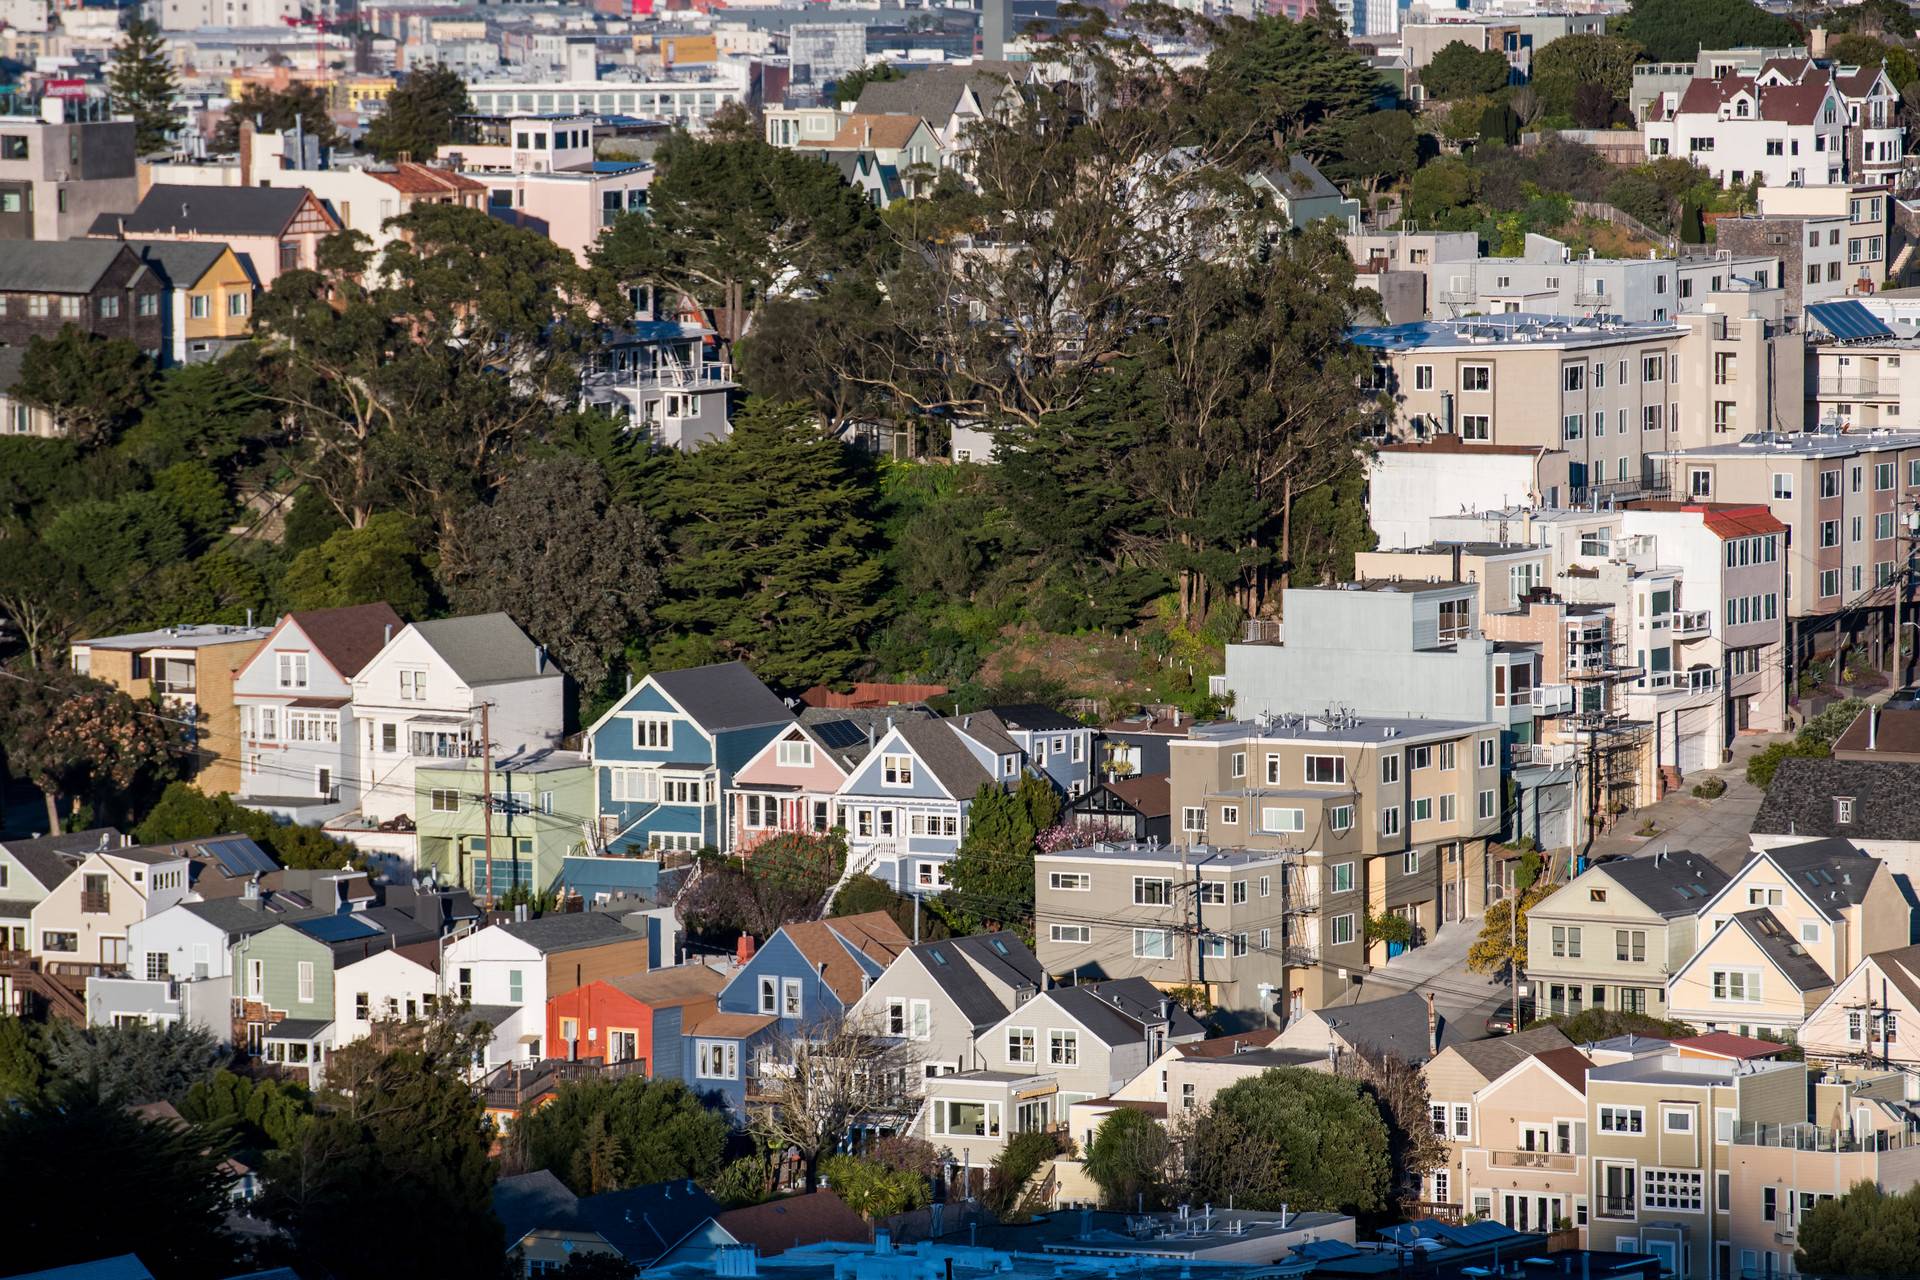 Bay Area Housing Prices Confound Dire Forecasts of Coronavirus Pandemic Collapse